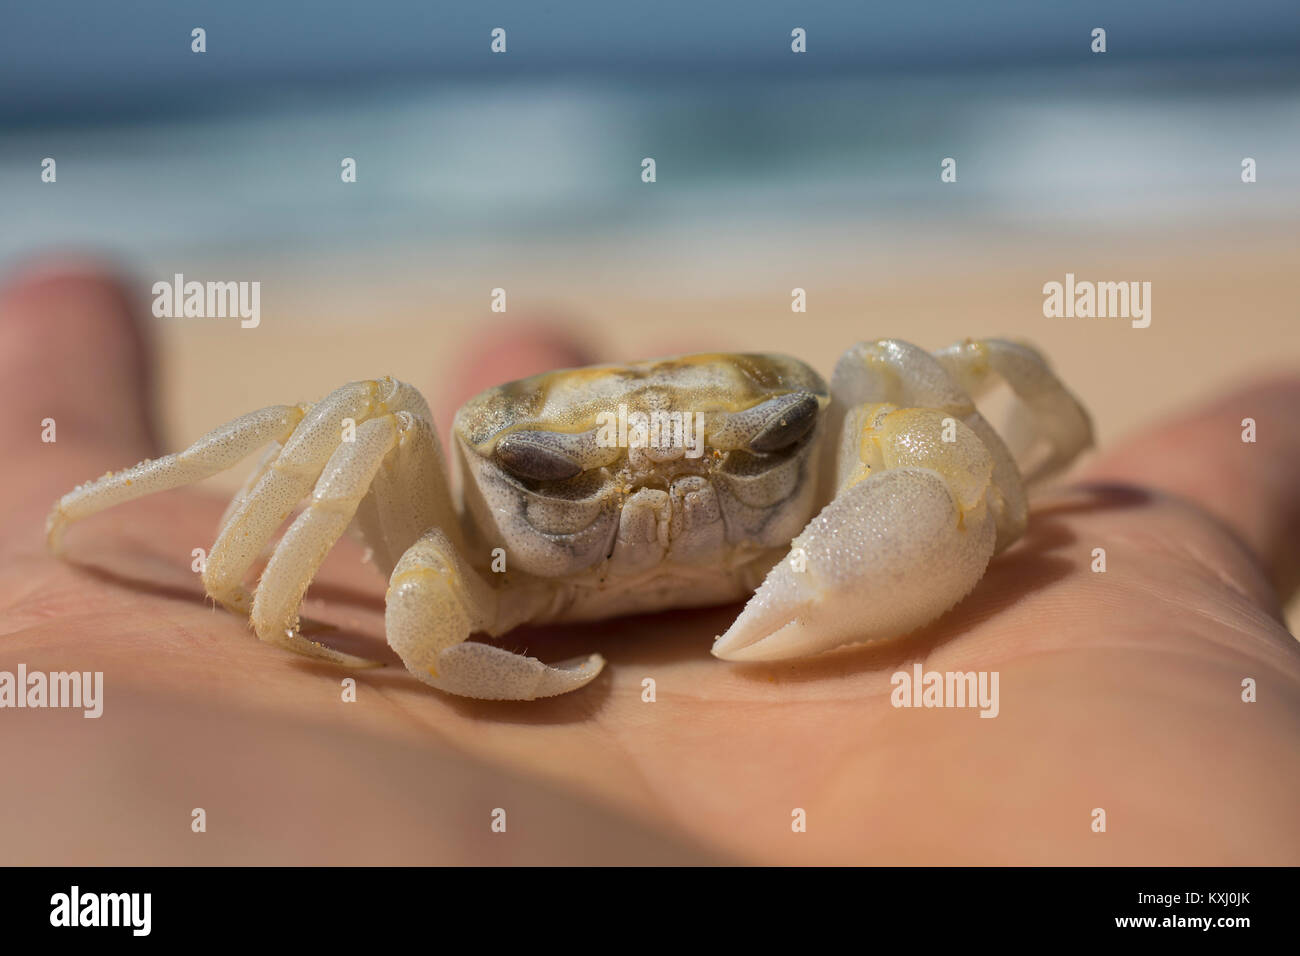 Cropped hand of boy holding crab at beach, Bermagui, New South Wales, Australia Stock Photo